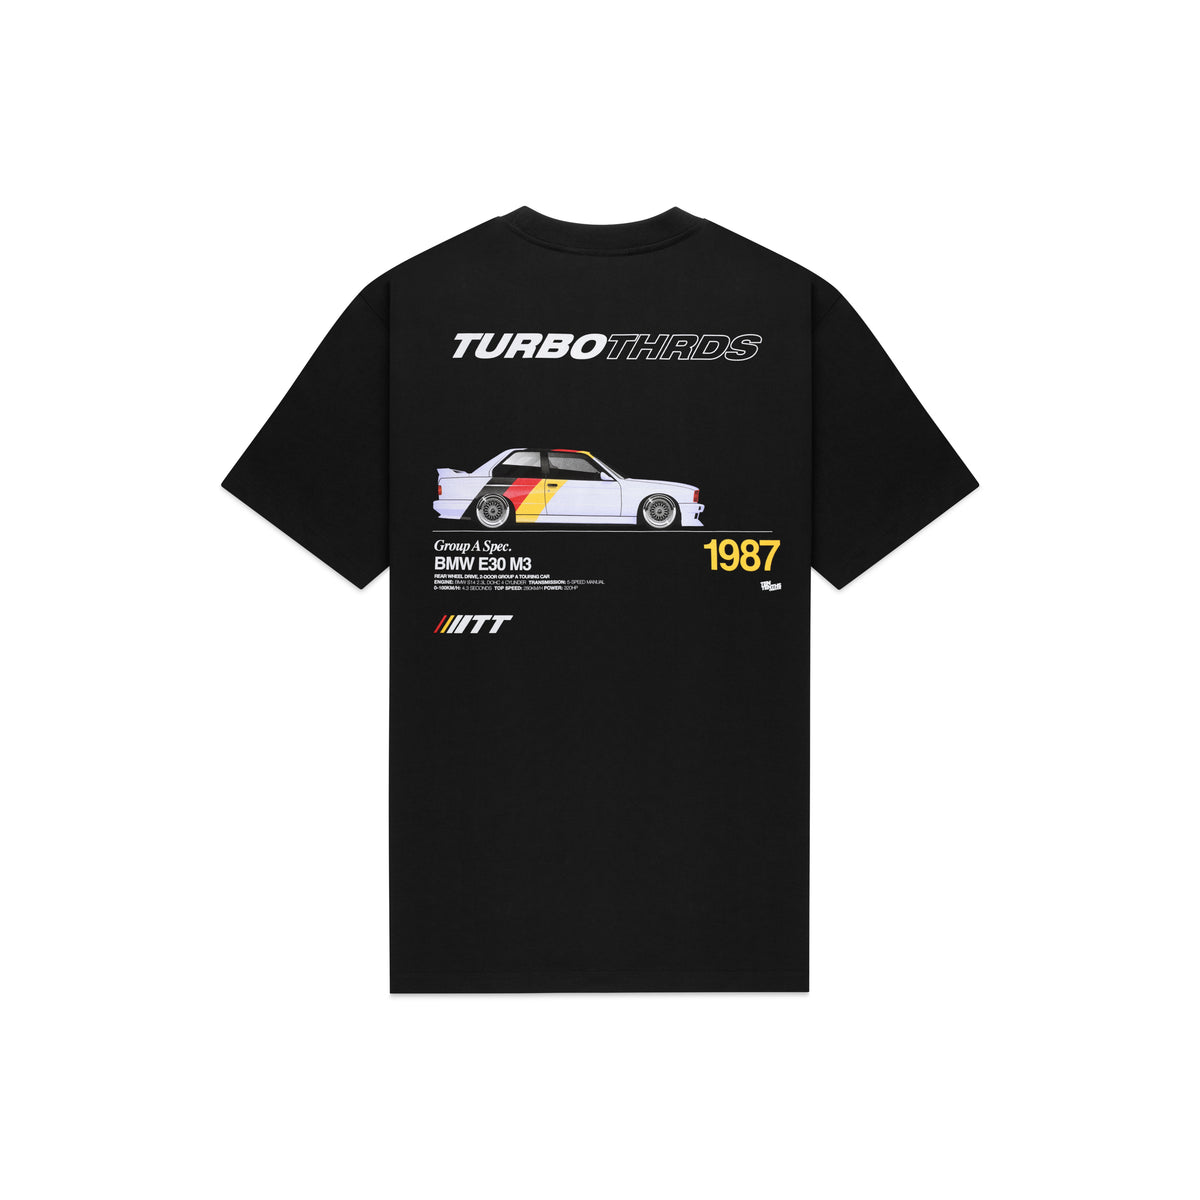 Turbo Threads relaxed black tee with a BMW E30 M3 graphic